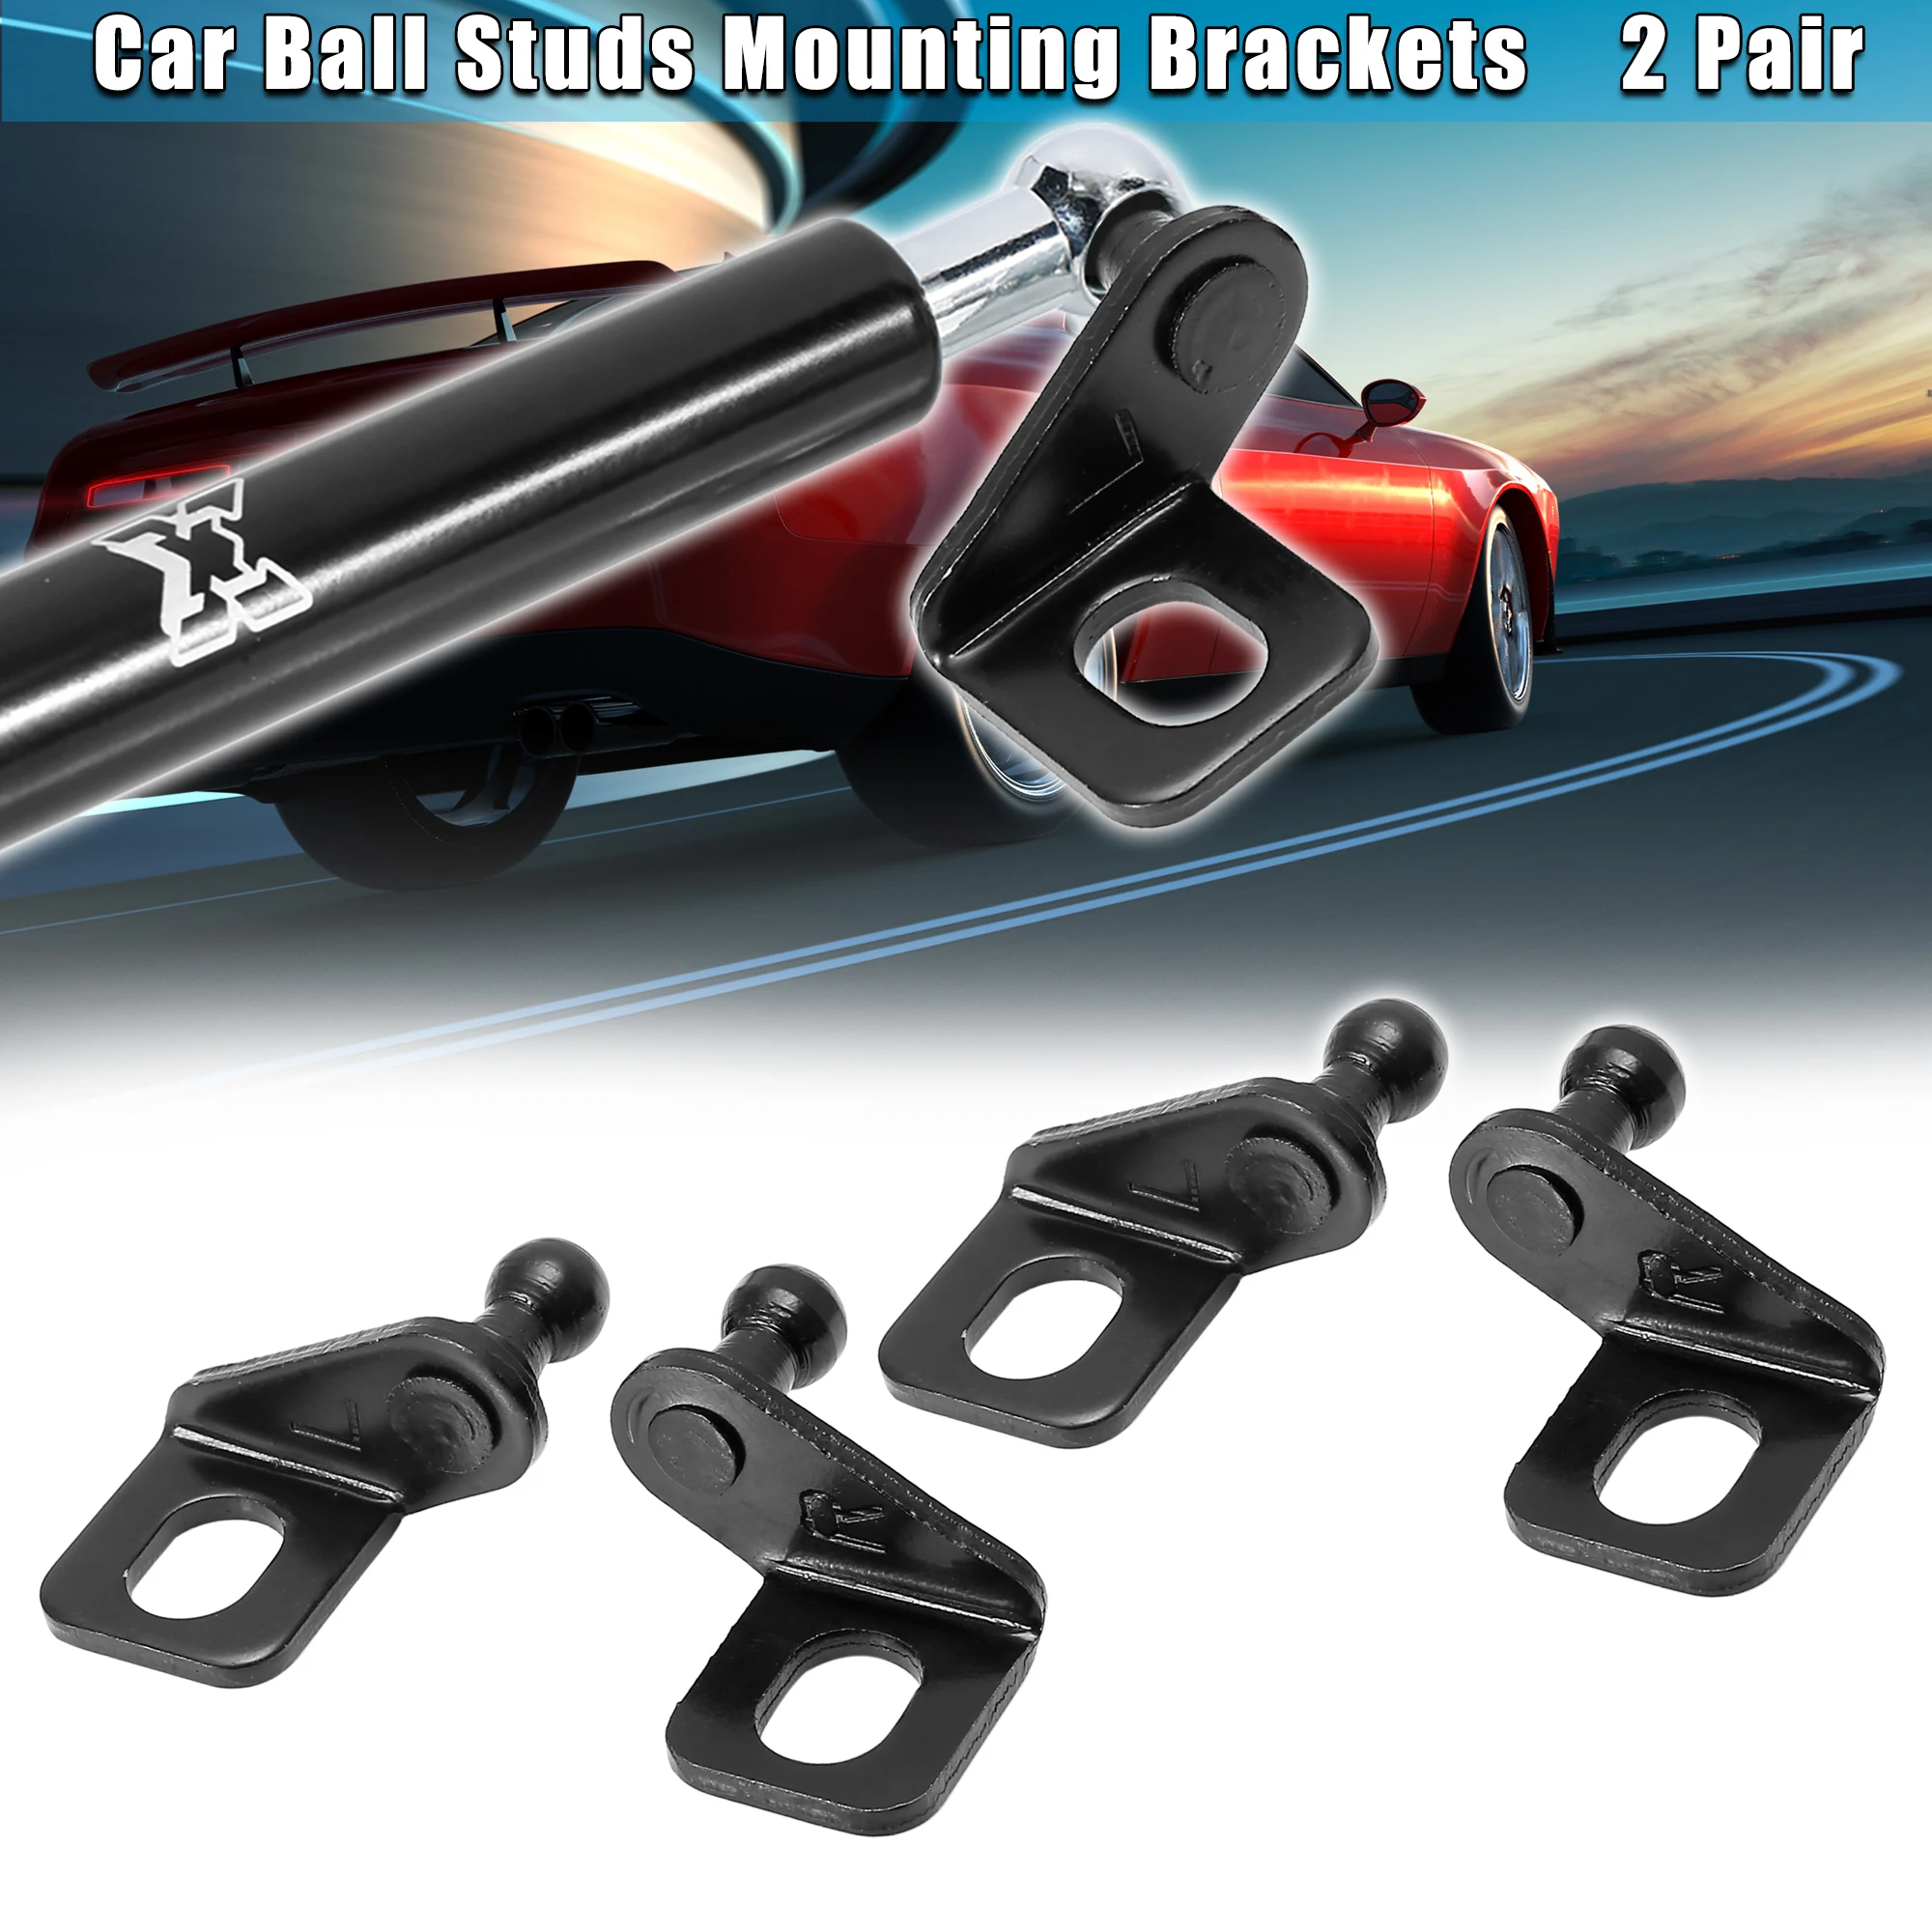 X Autohaux 1 Pair 2 Pairs 10mm Car Ball Studs Mounting Brackets for Gas ...